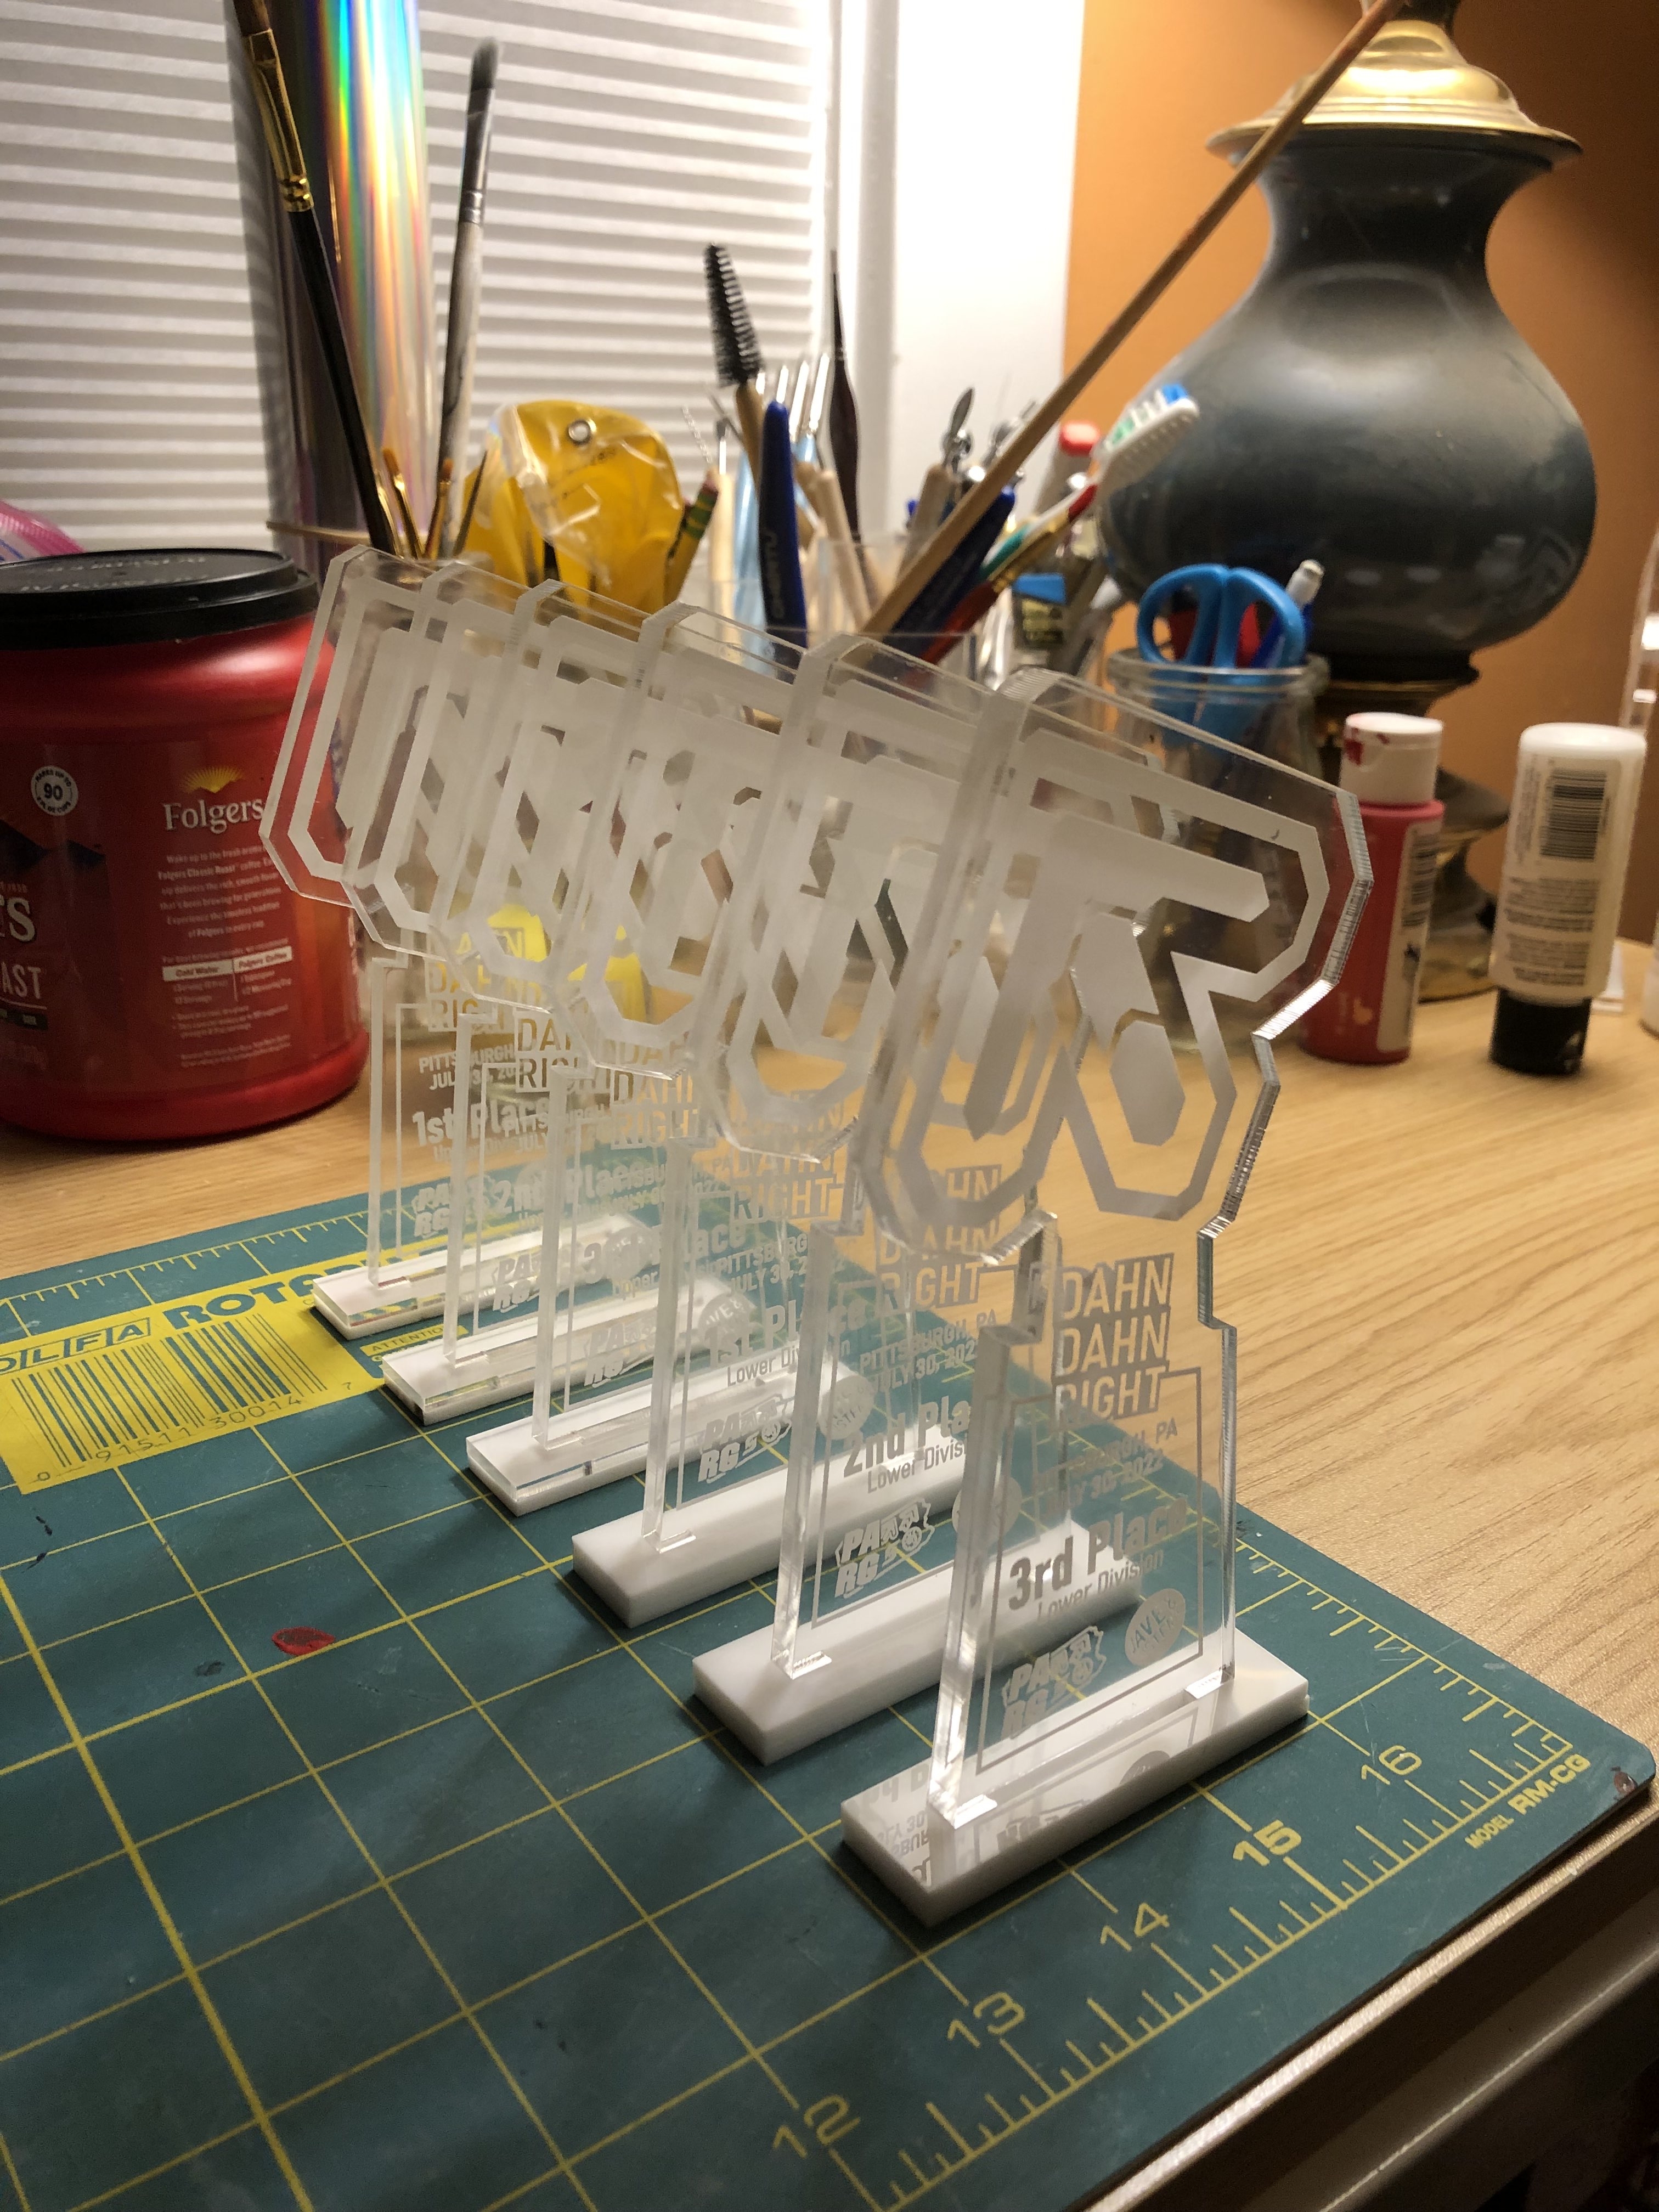 A picture of the Dahn Dahn right trophies from 2022 - laser cut